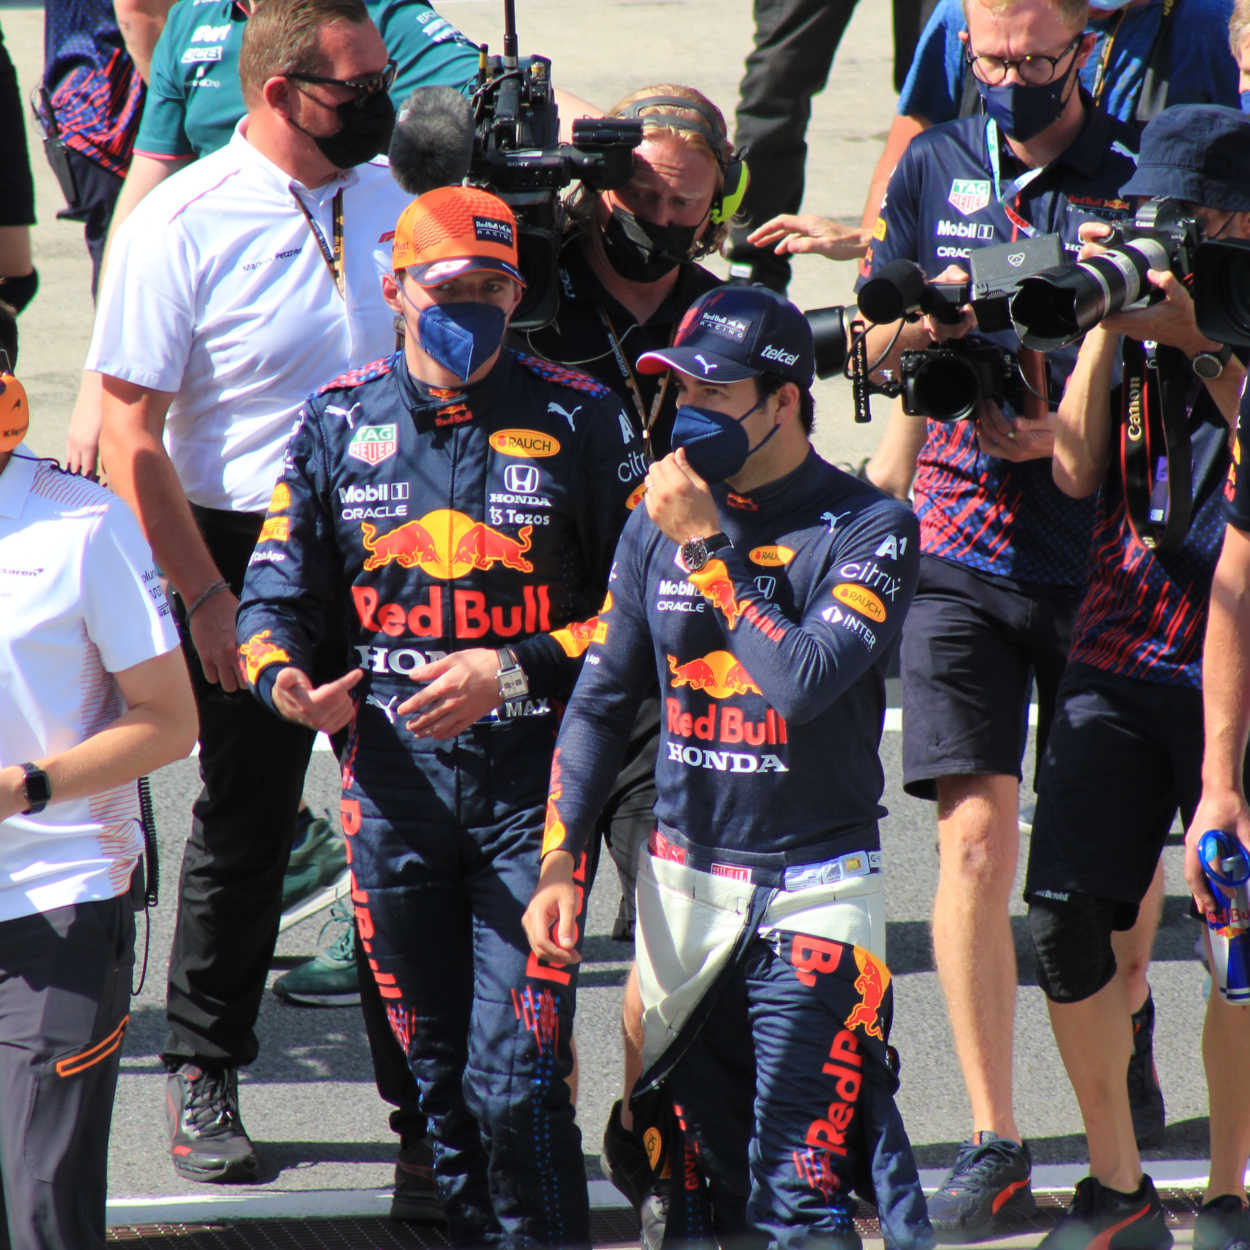 Red Bull drivers Sergio Perez and Max Verstappen